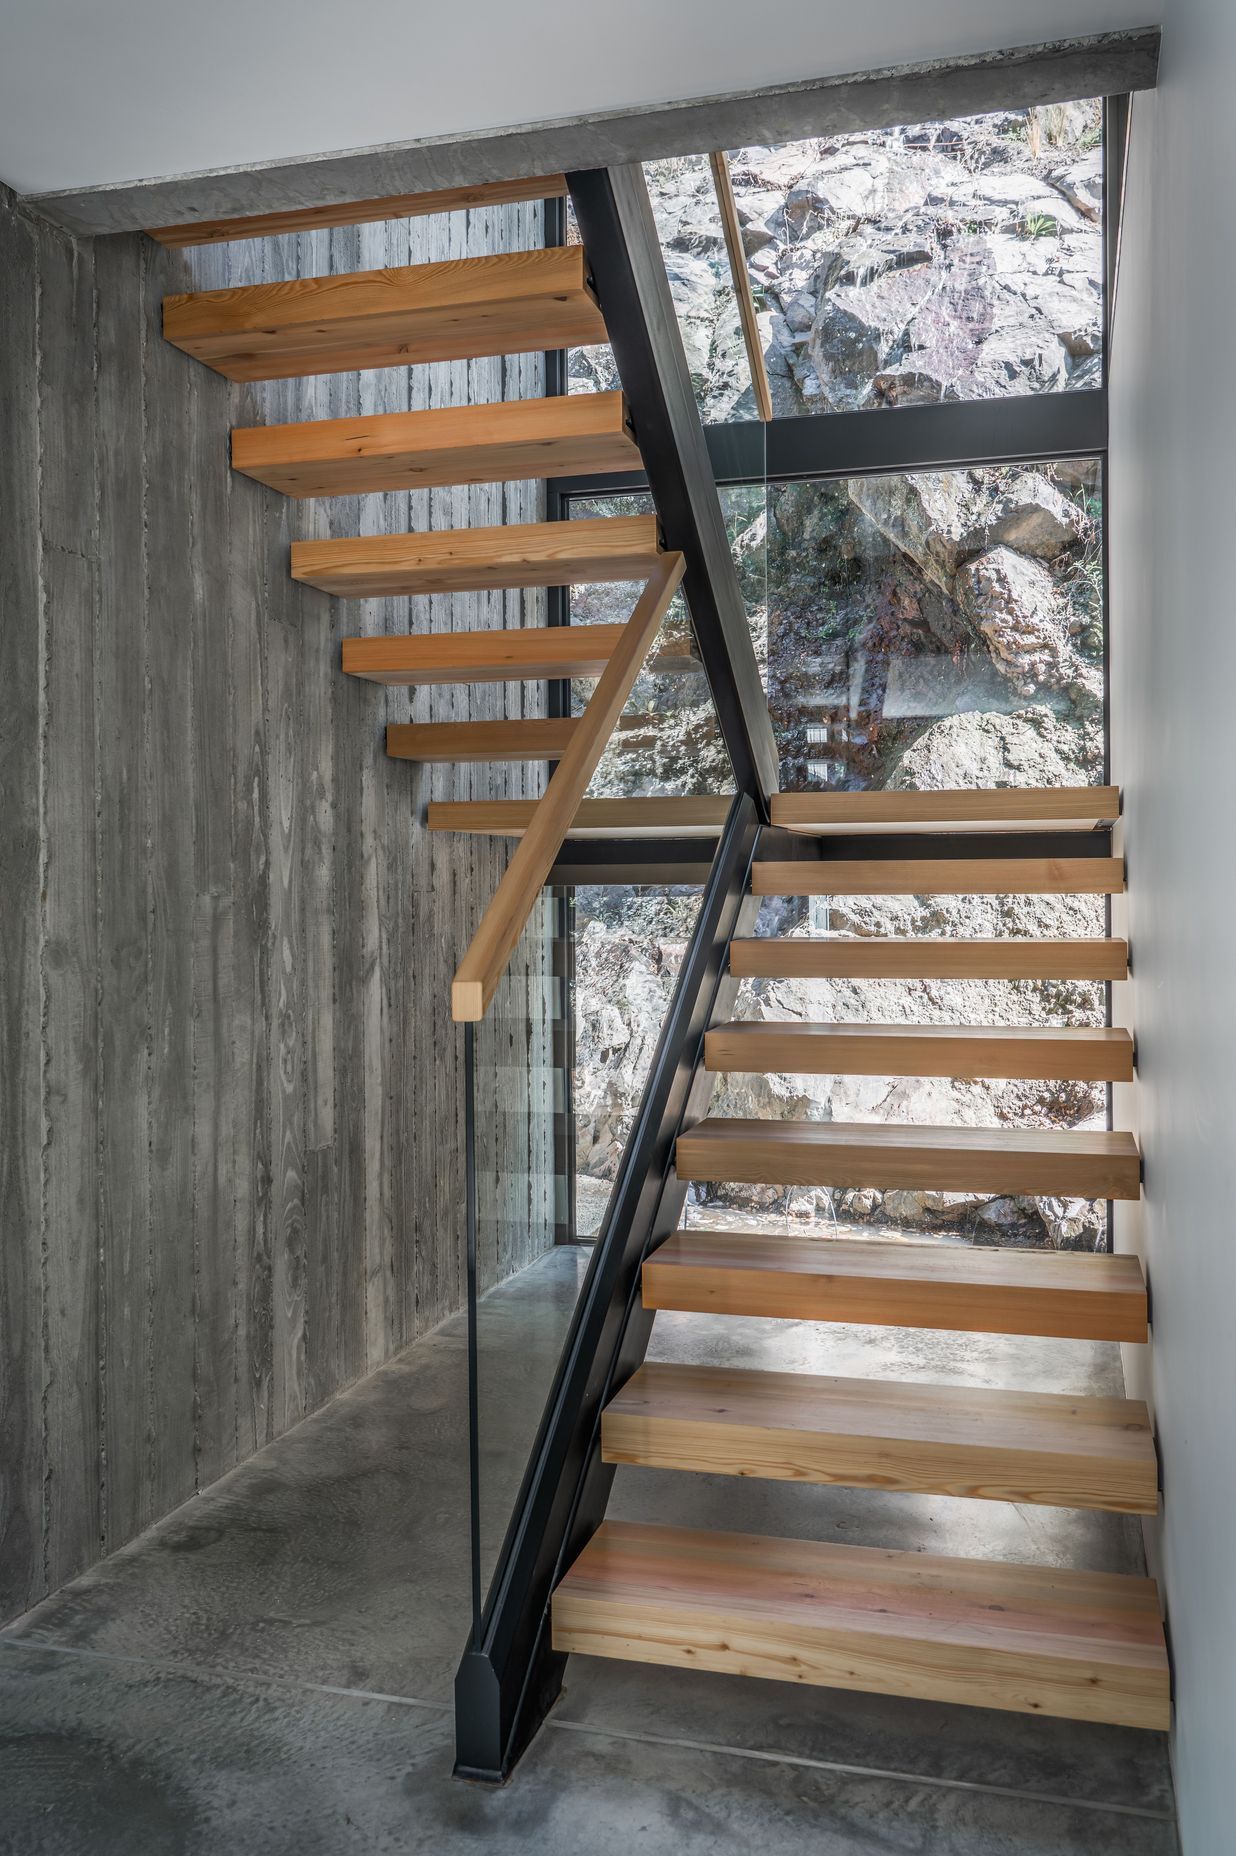 An exposed concrete wall creates a strong synergy between interior and exterior.